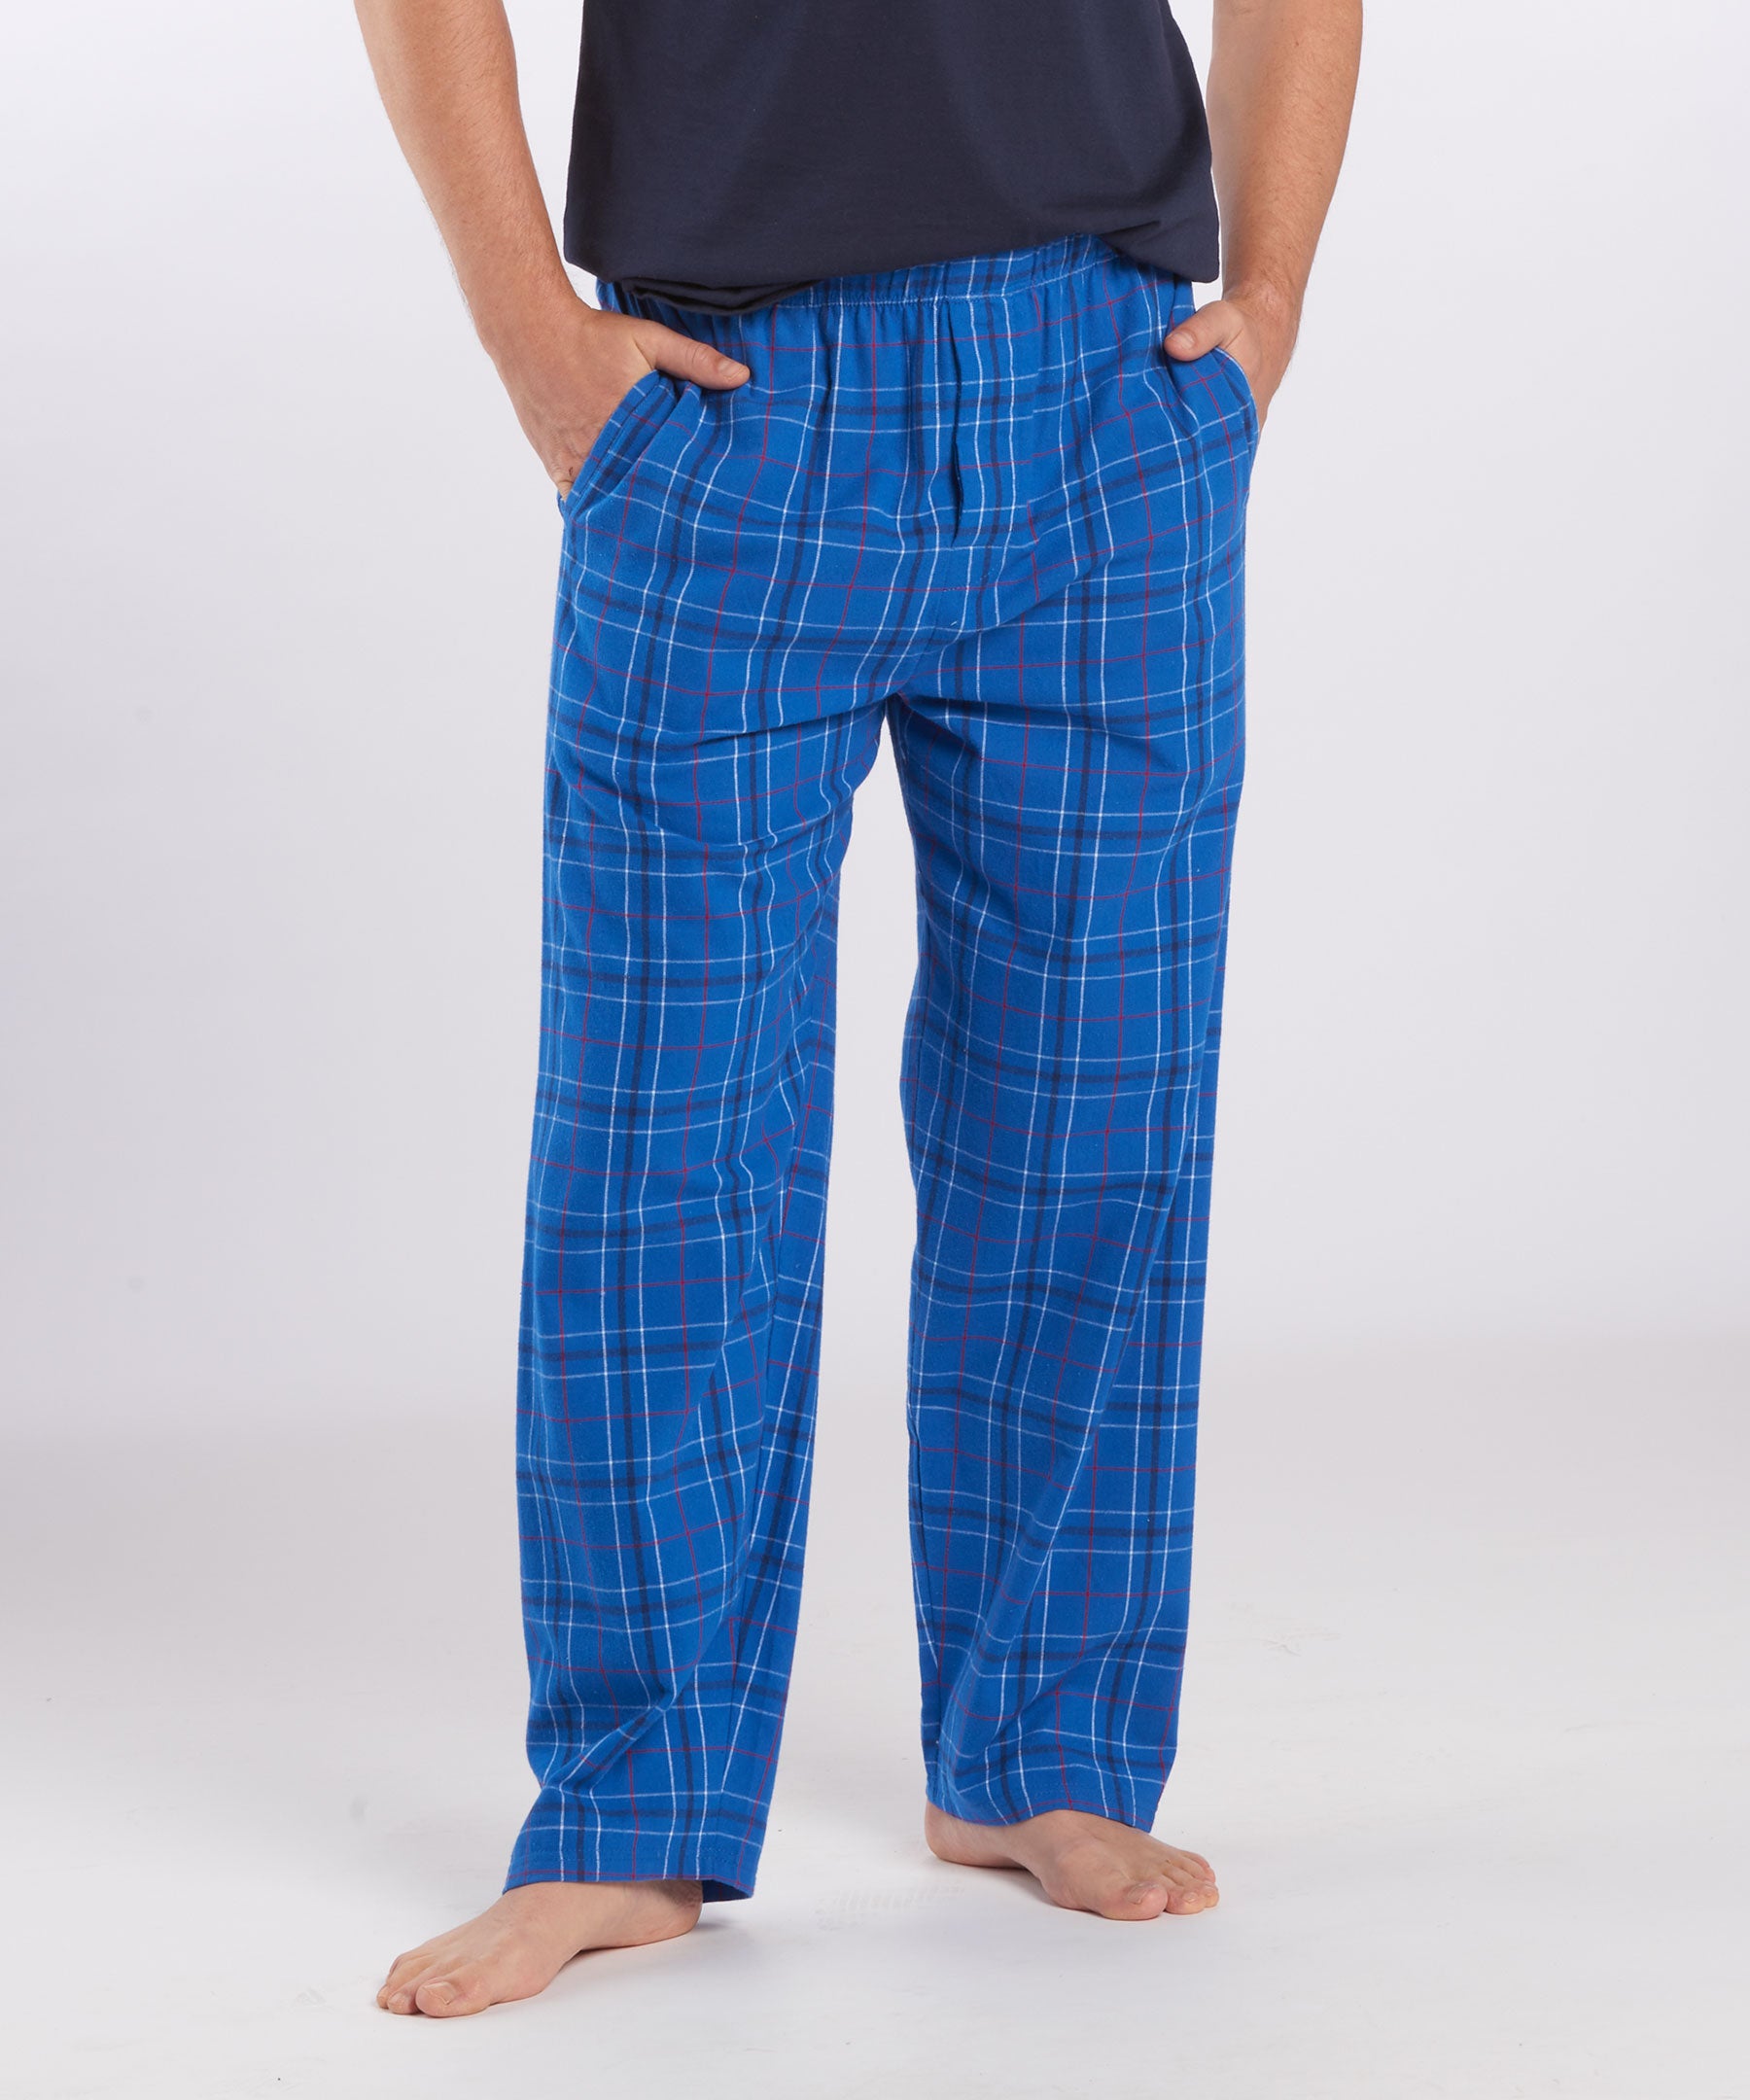 Men's Flannel Buffalo Plaid Pajama Pant in Charcoal